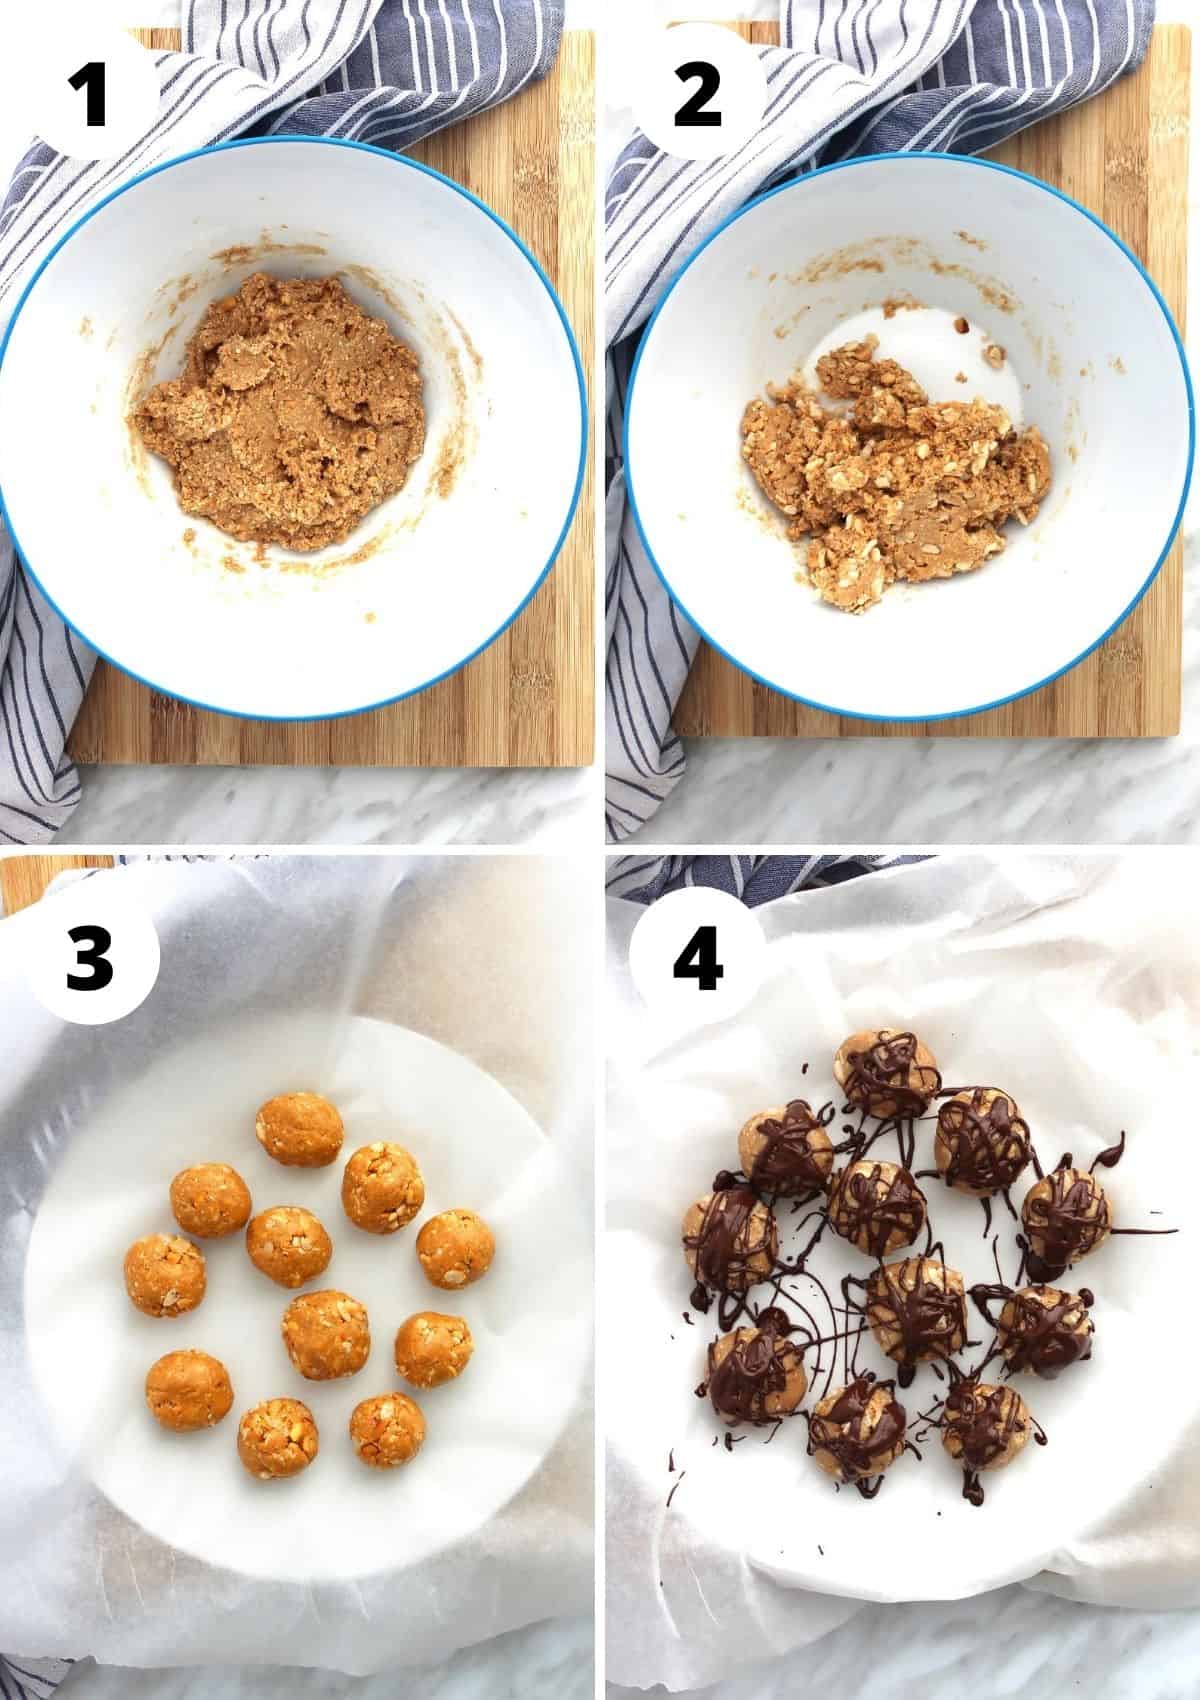 Four photos to show how to make the peanut butter bites